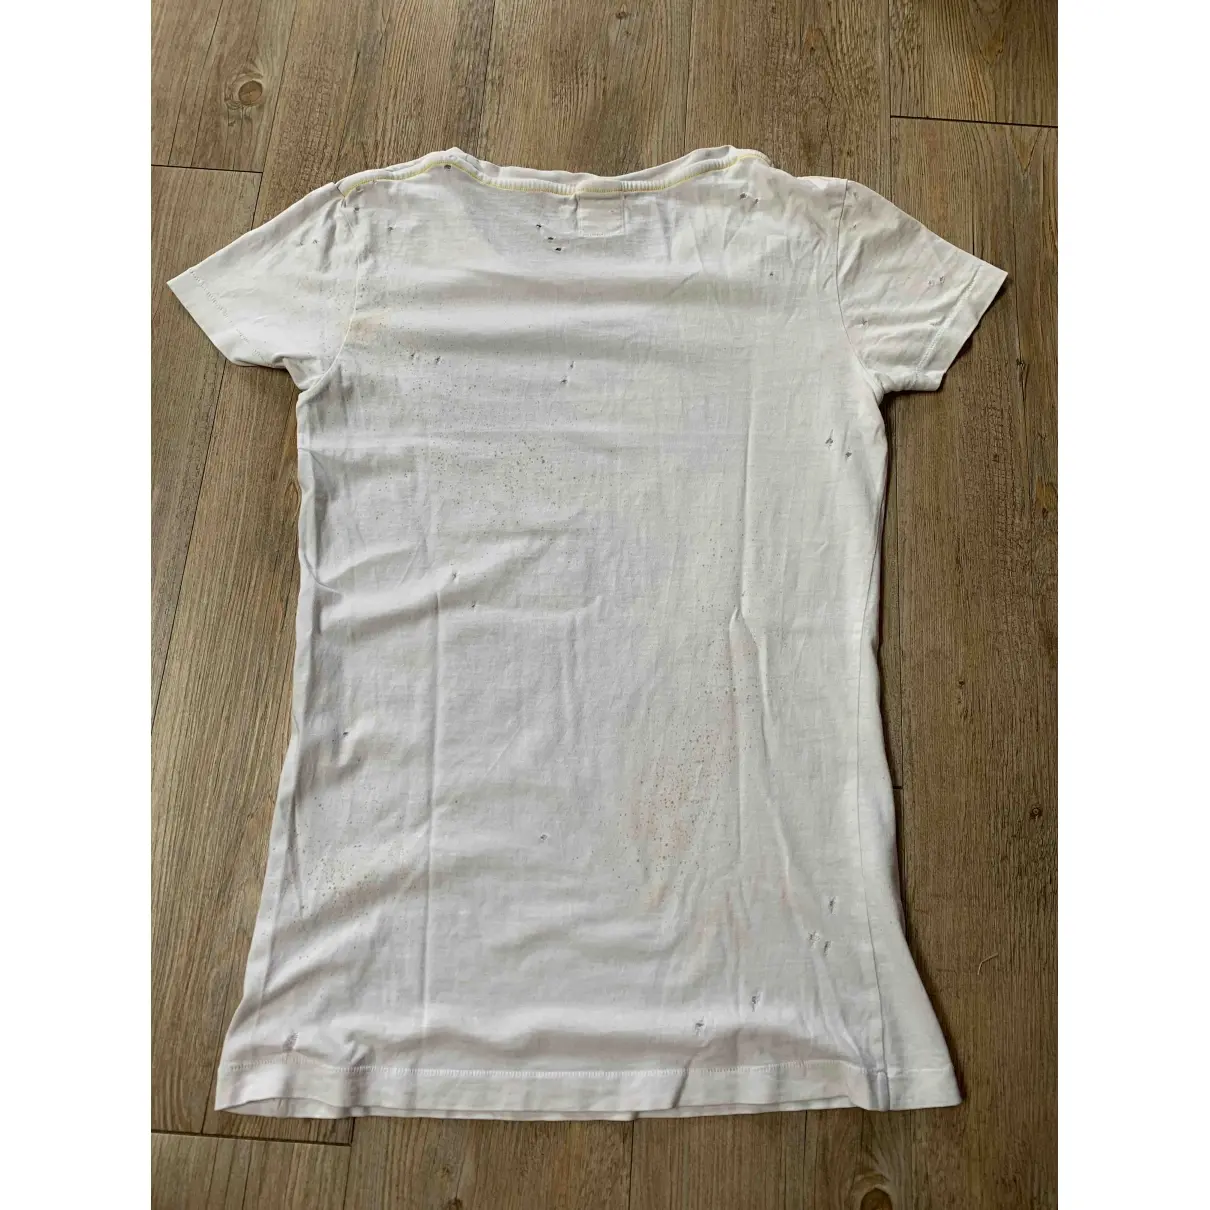 Htc T-shirt for sale